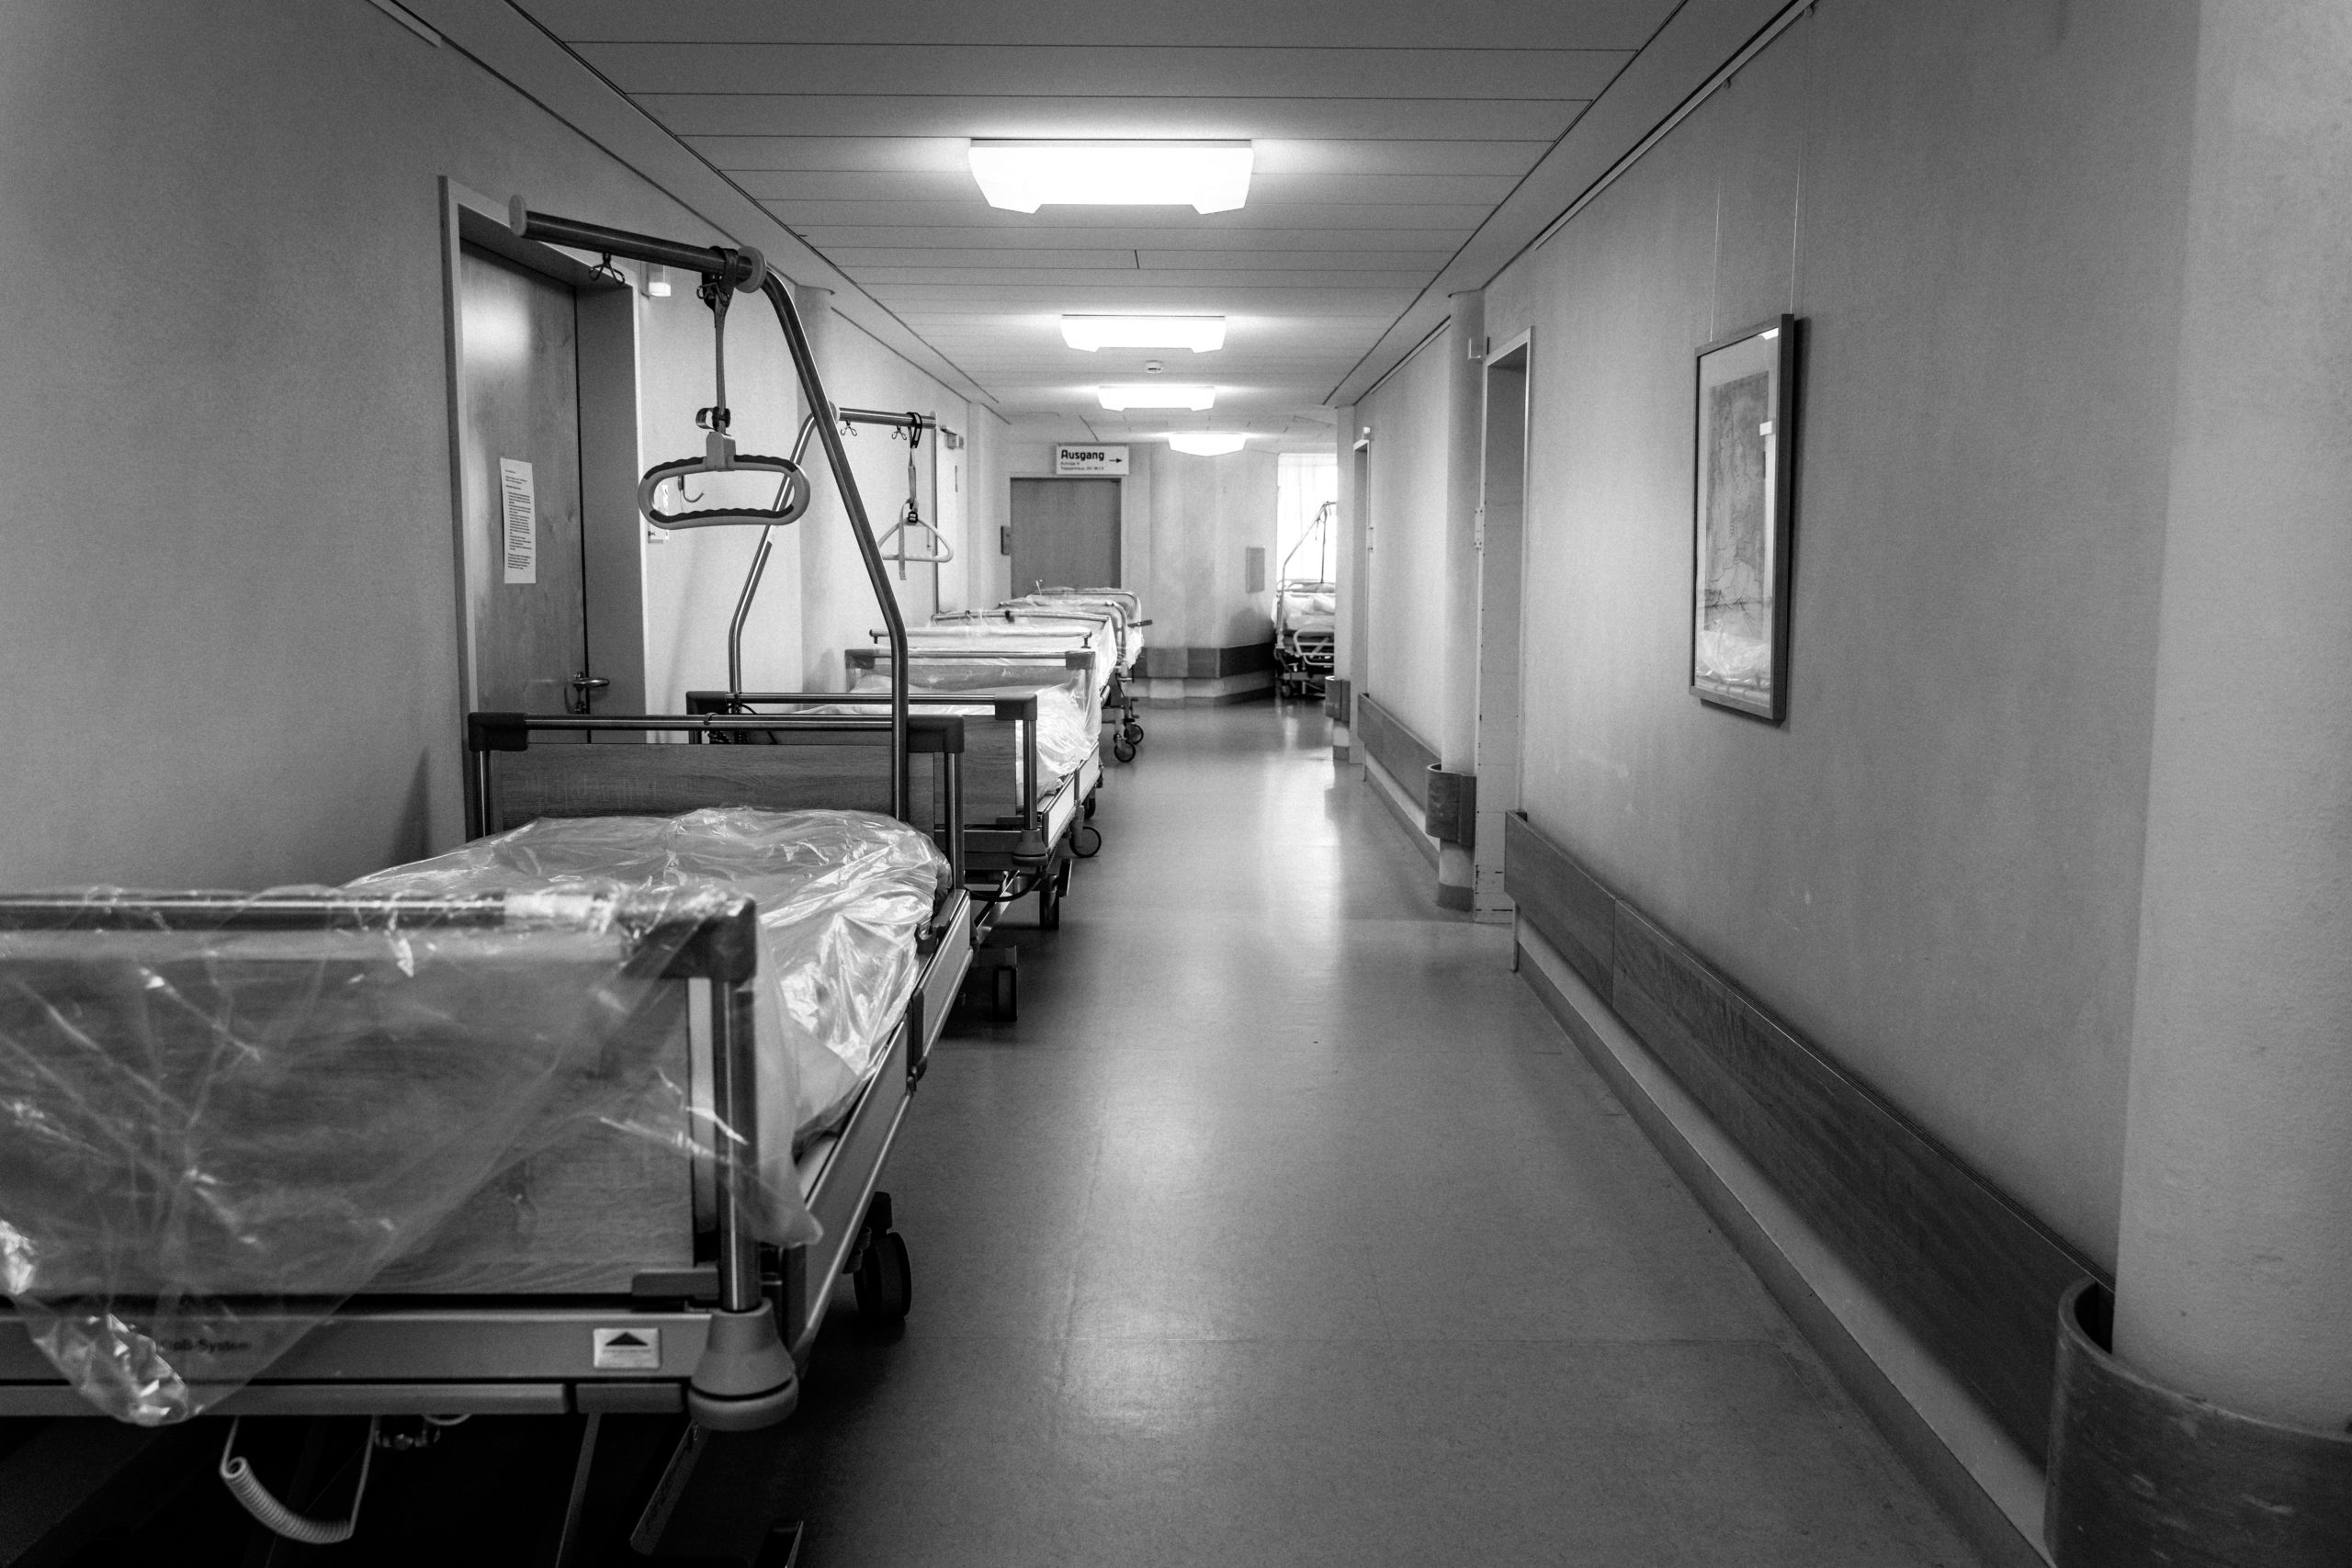 How an Early Hospital Discharge Can Lead to Medical Malpractice